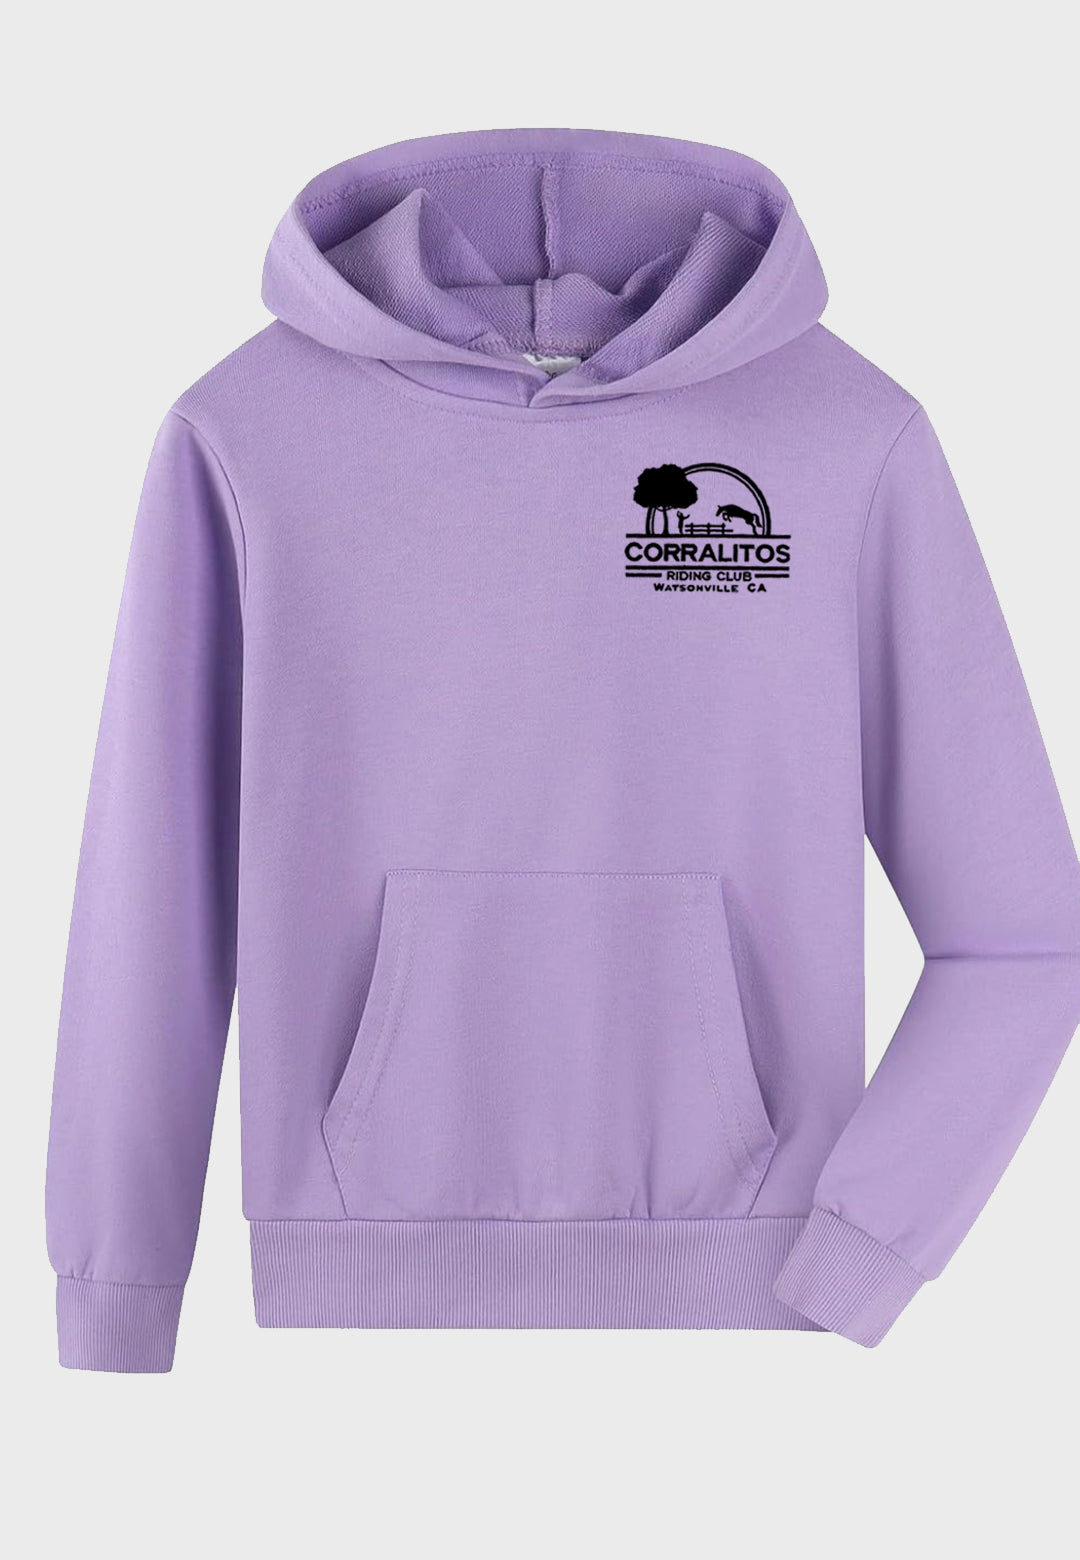 Corralitos Riding Club Spring & Gege Youth Soft Hooded Pullover Sweatshirt, 2 Color Options